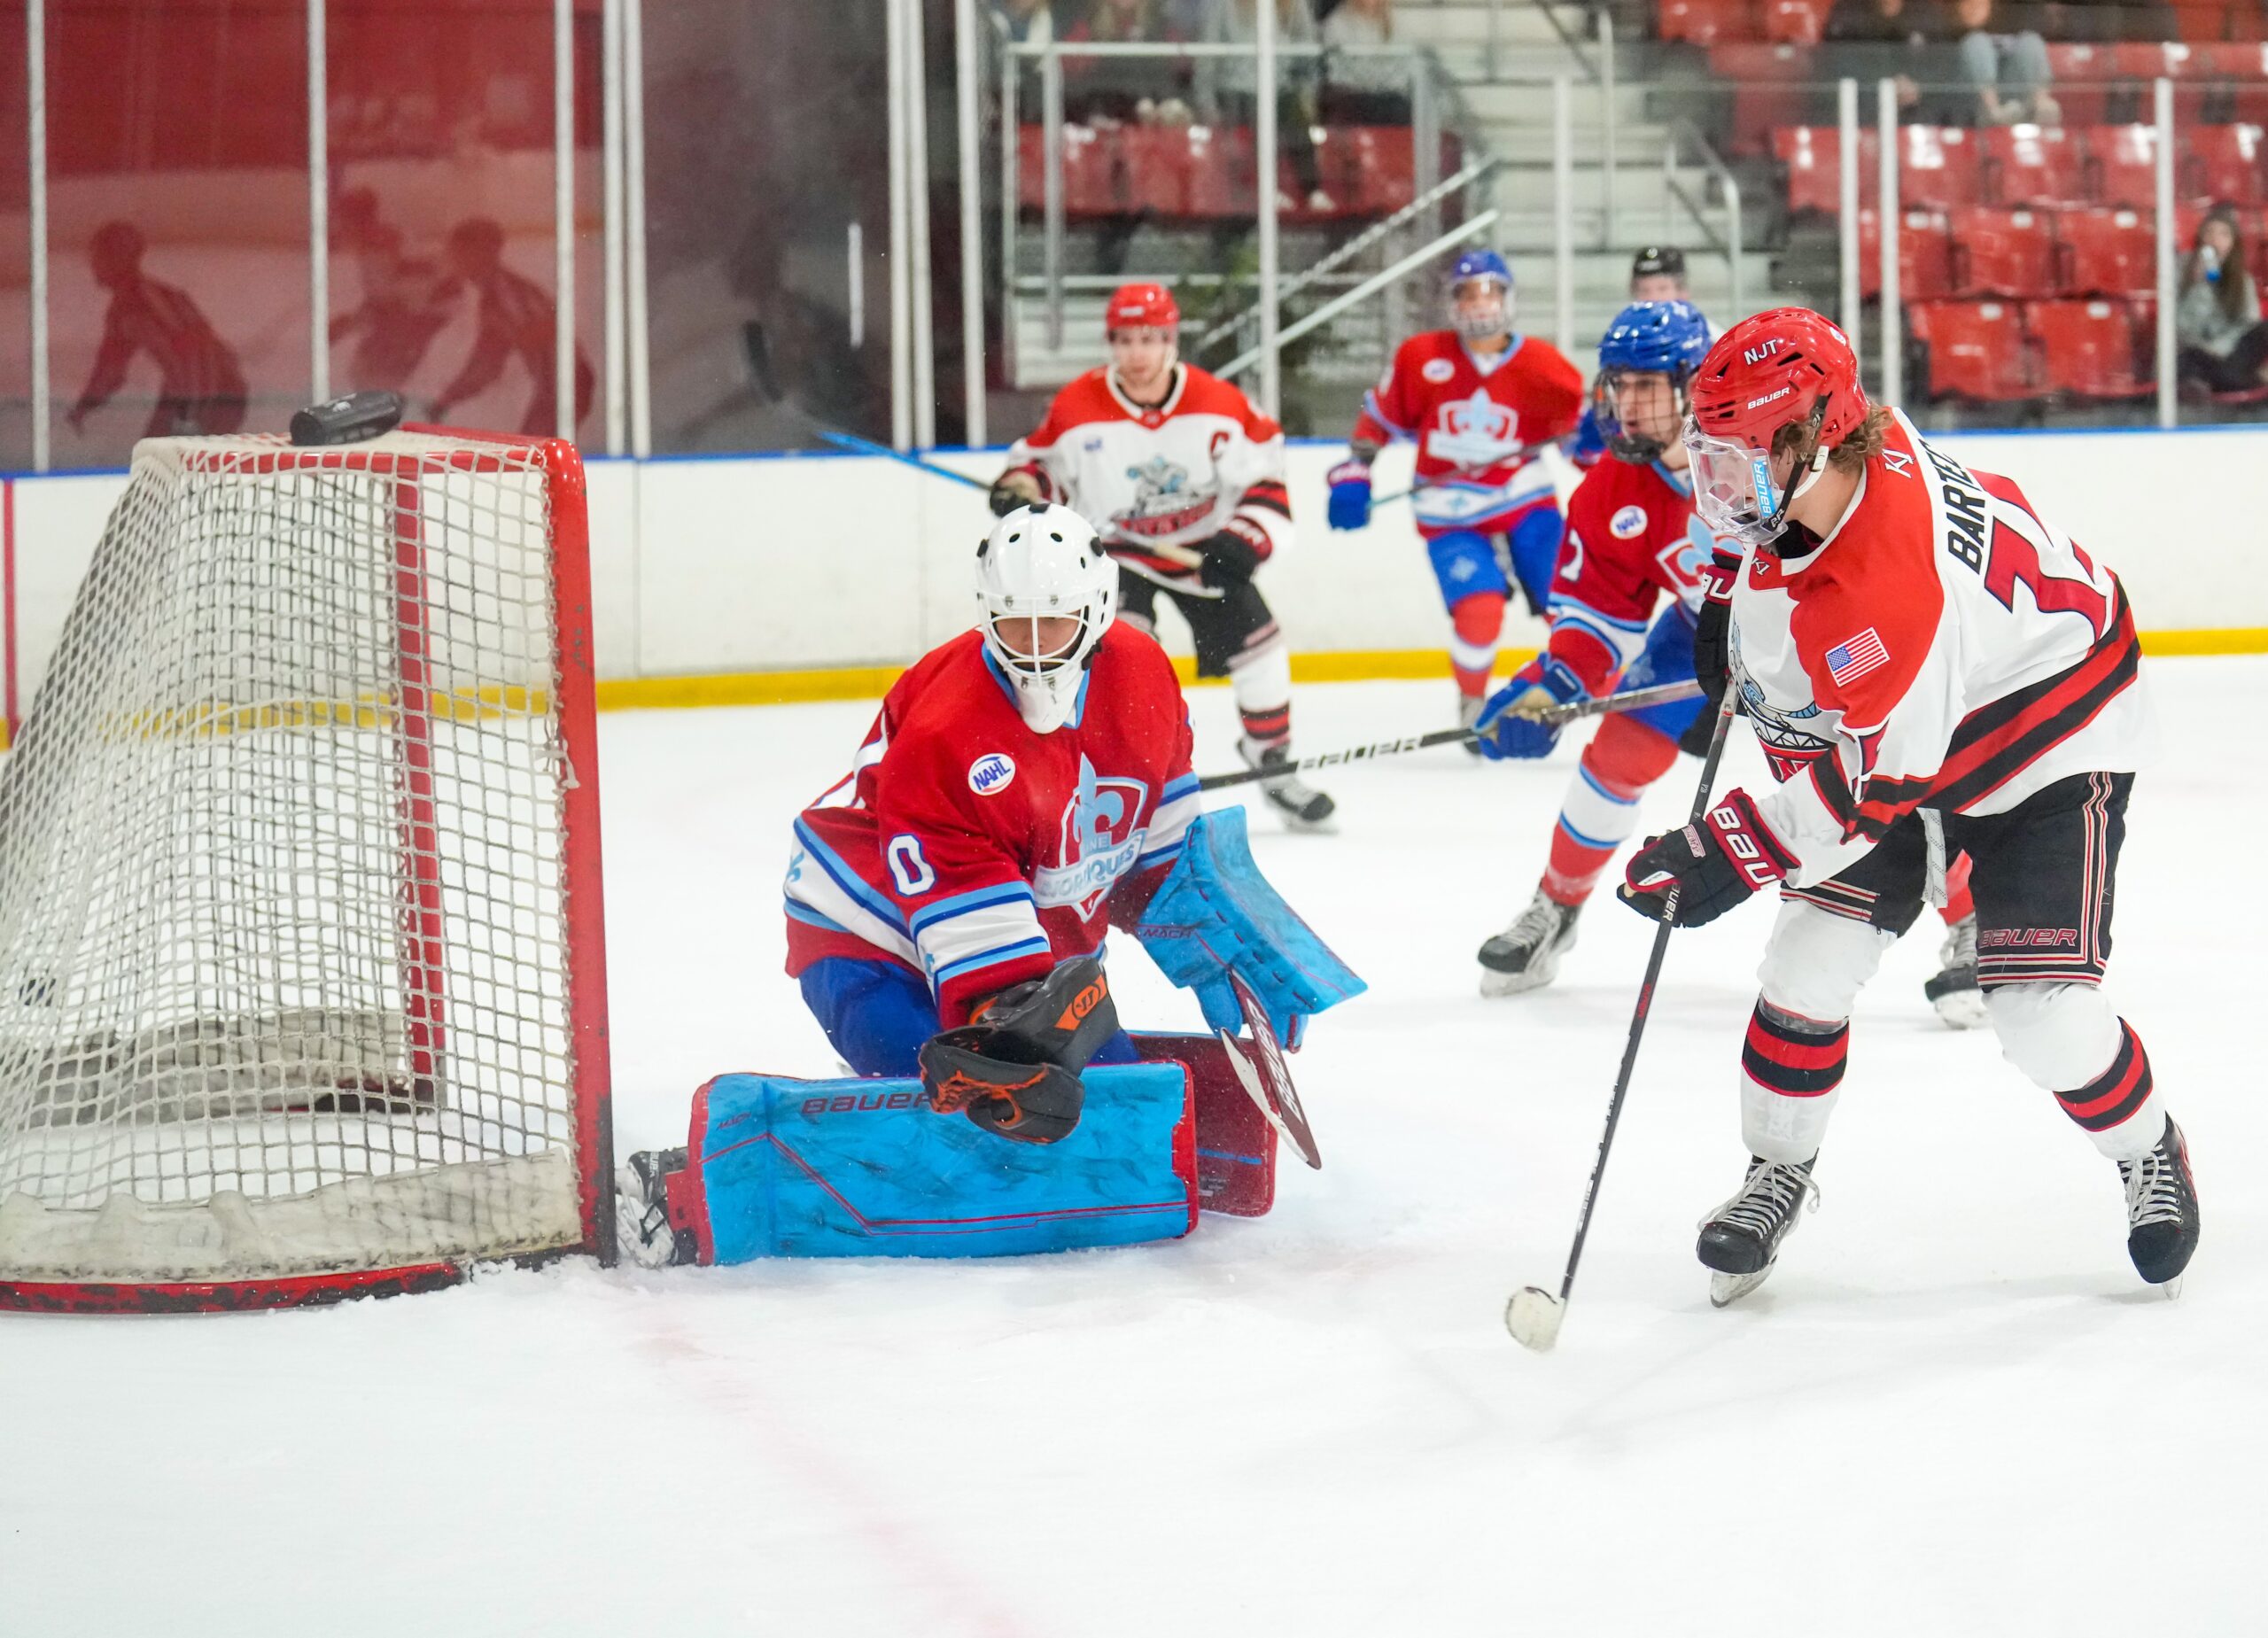 Bartecko’s goal in OT gives Titans 5 – 4 win over Nordiques.